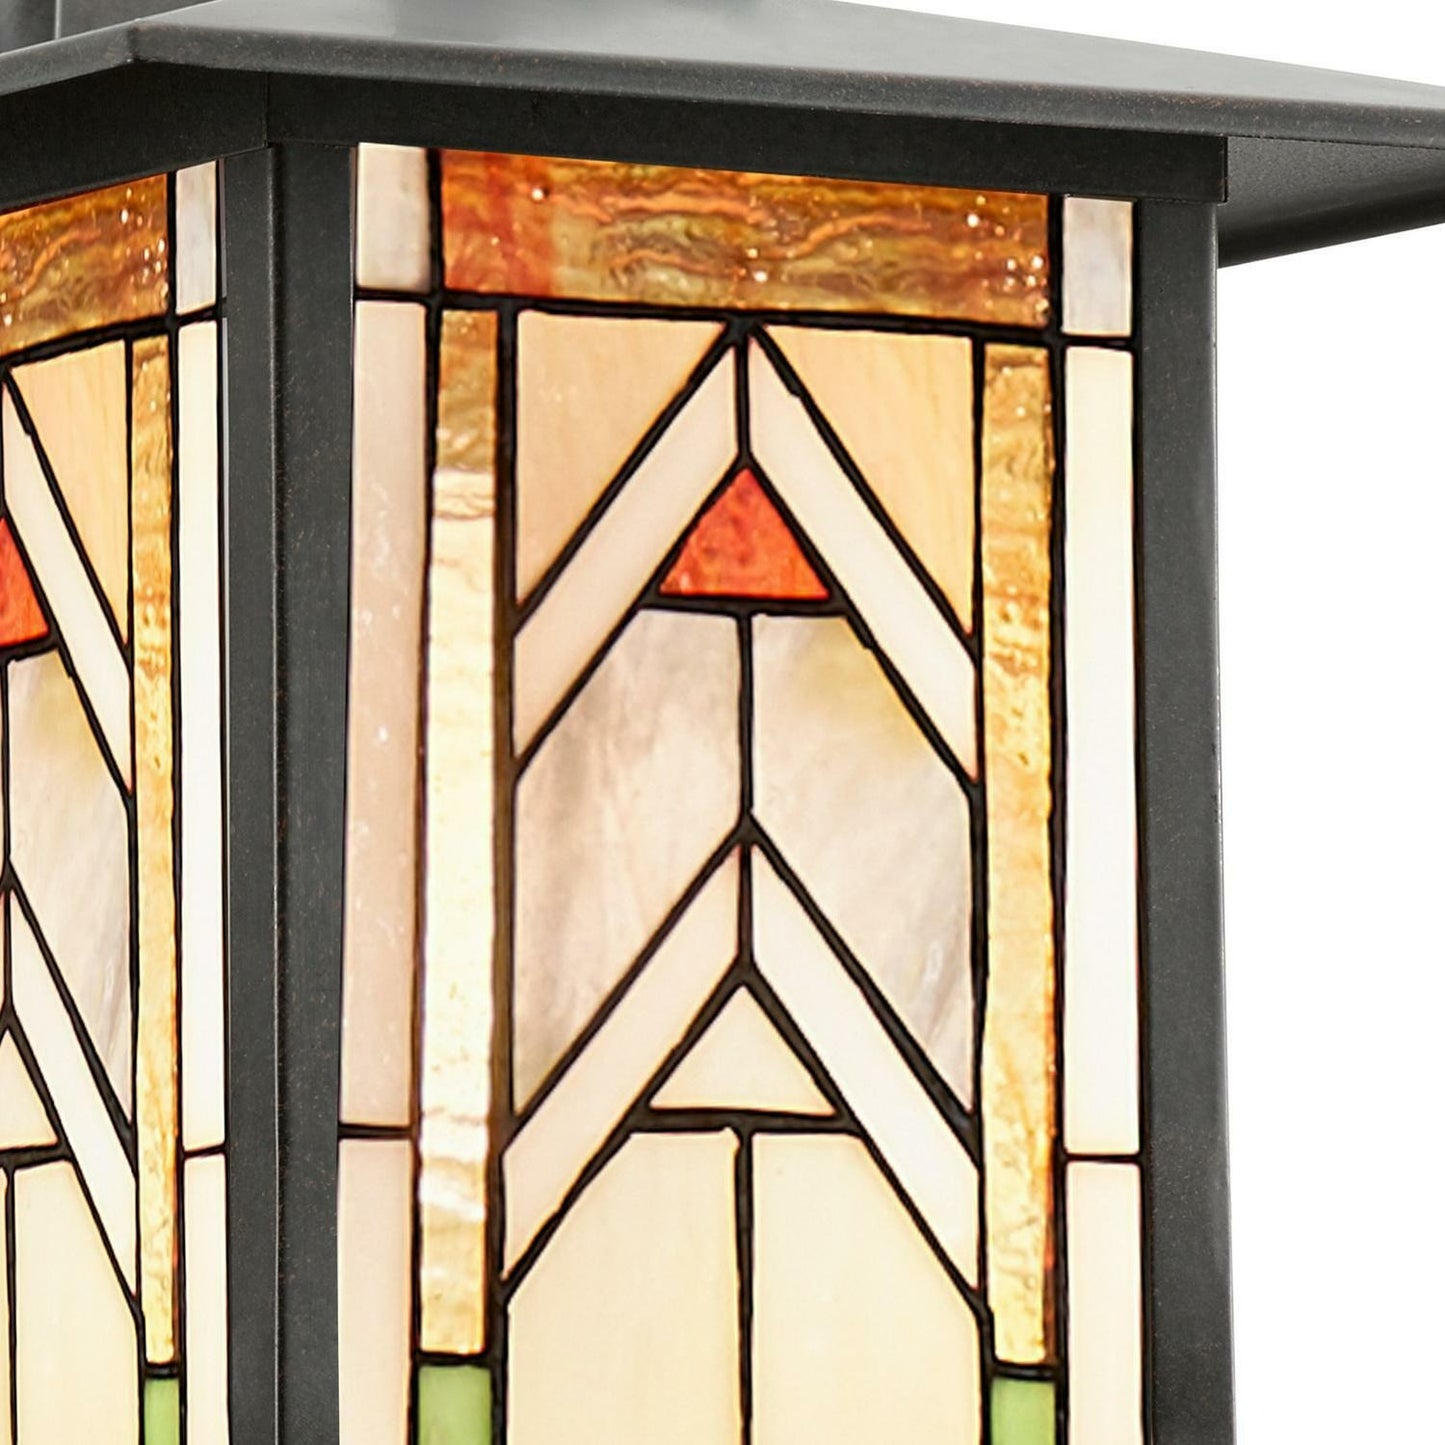 Oil Rubbed Bronze Finish Terracotta Tiffany Style Stained Glass Lantern Sconce